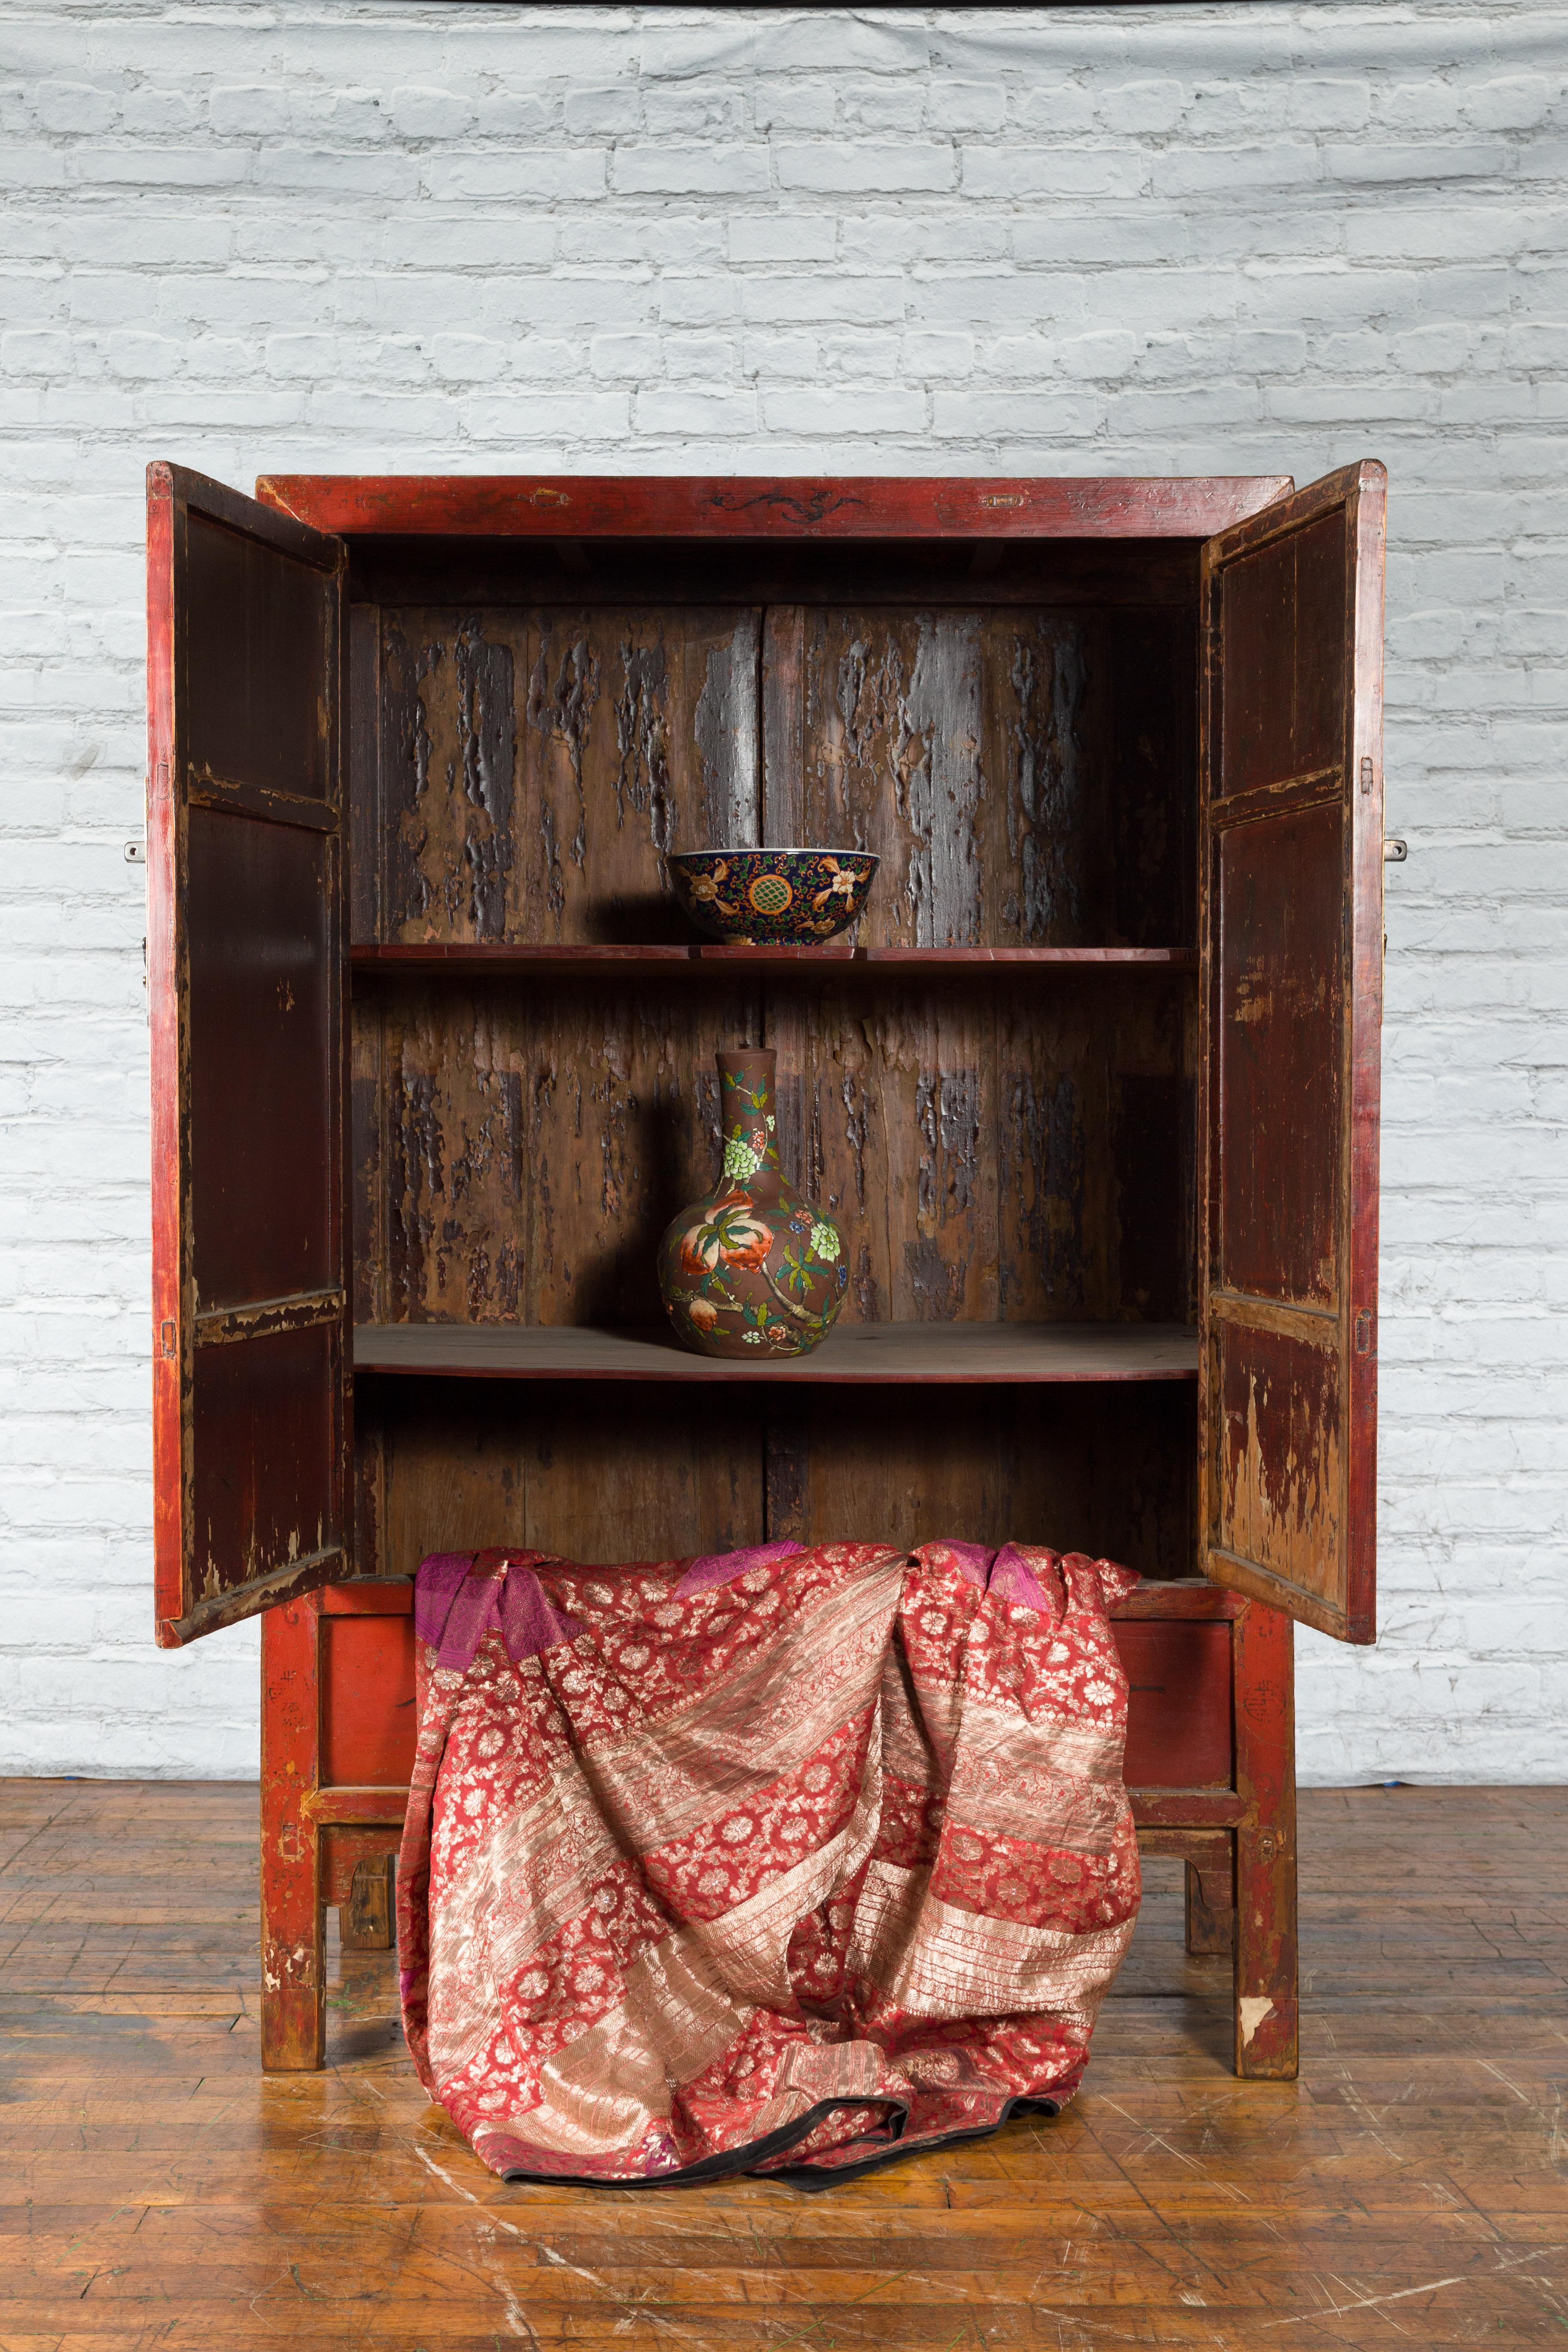 Lacquered Qing Dynasty 19th Century Hand-Painted Cabinet with Original Red Lacquer For Sale